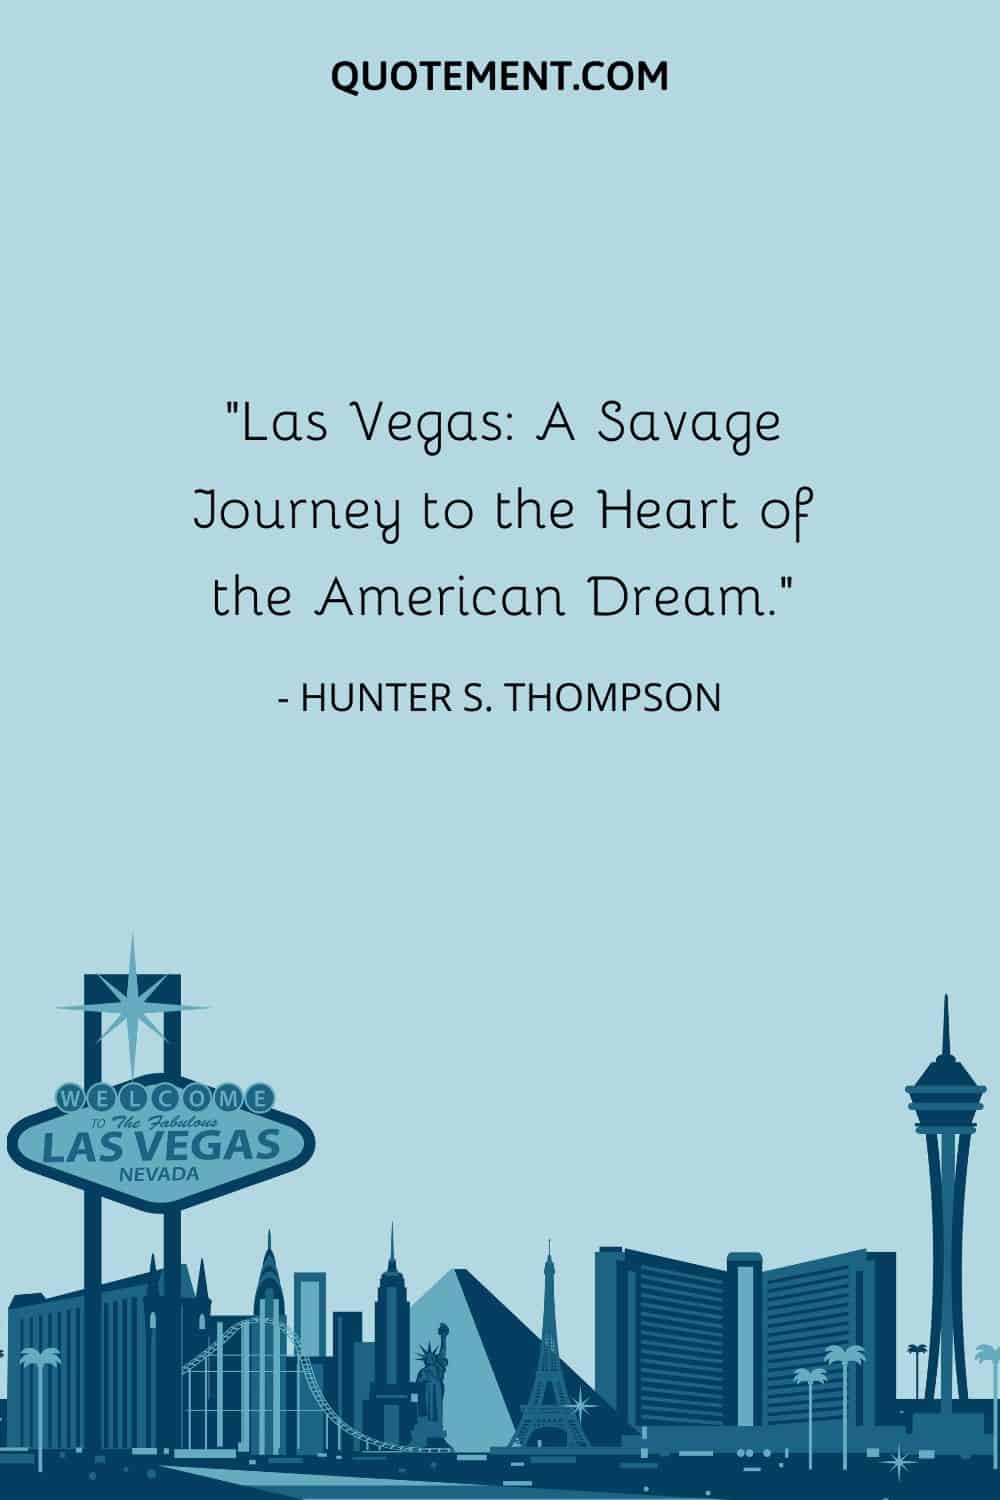 “Las Vegas A Savage Journey to the Heart of the American Dream.” — Hunter S. Thompson